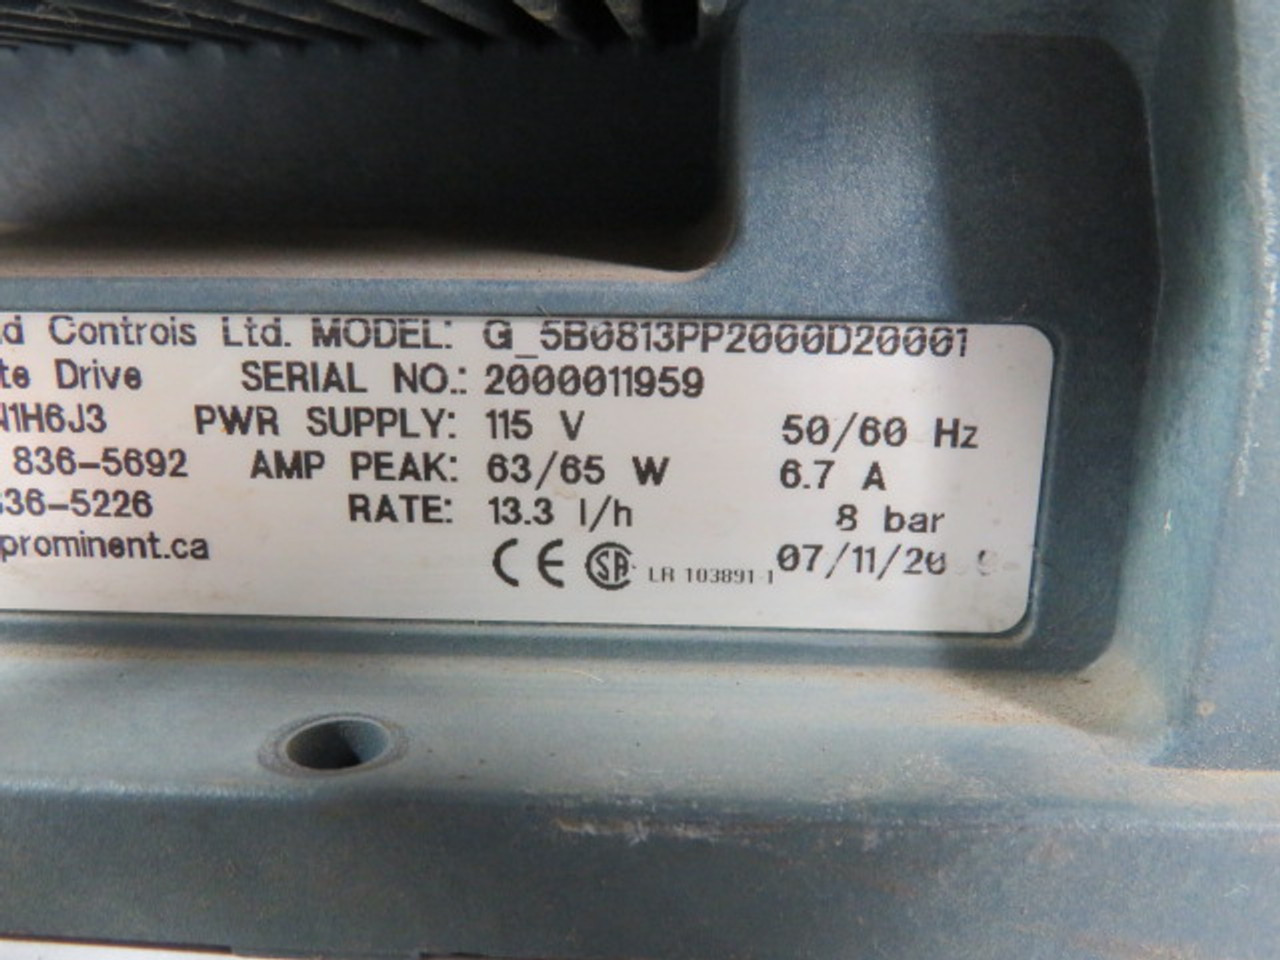 ProMinent G/5B0813PP2000D20001 Metering Pump Missing Cover 115V 50/60Hz USED